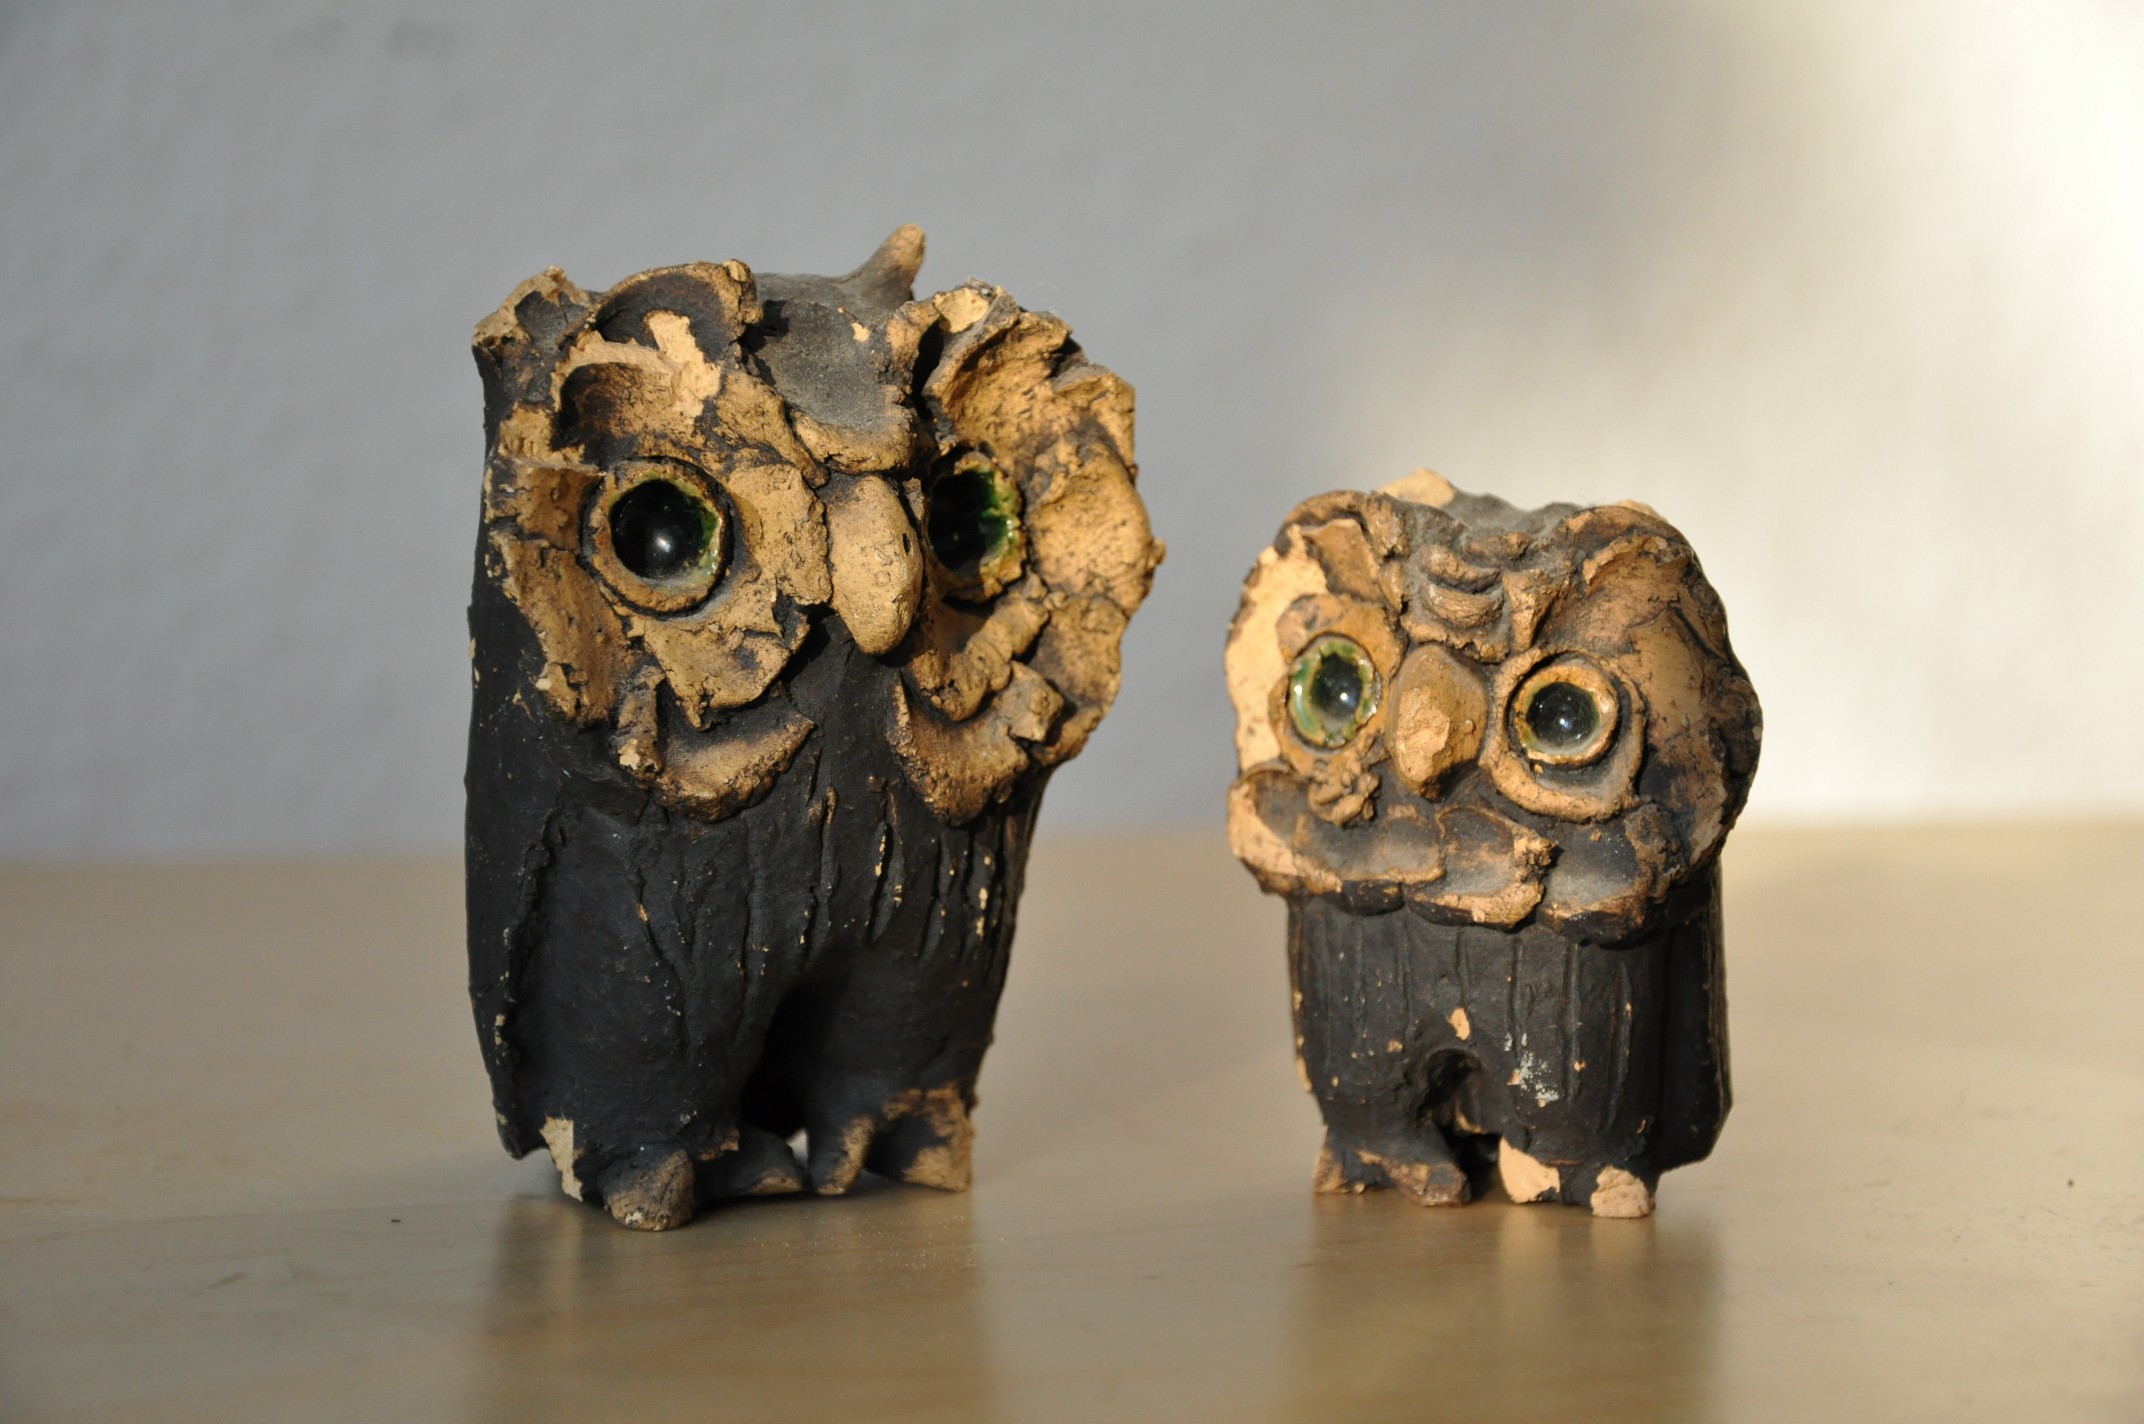 two small carved owls with green eyes, standing next to each other